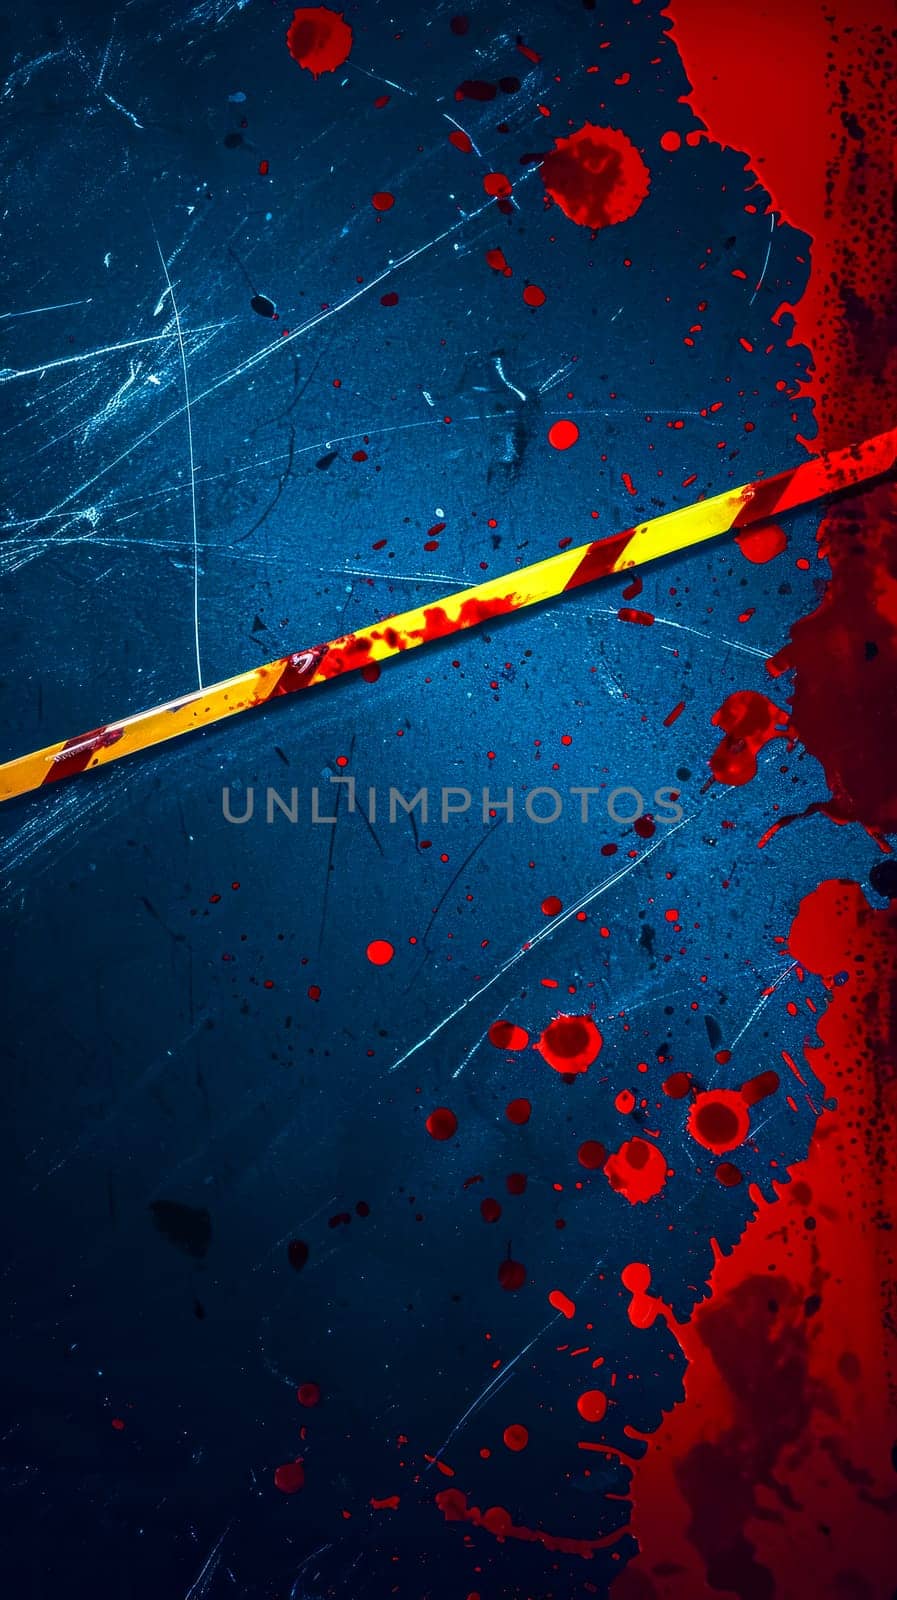 textured background with splashes of vibrant red and a yellow caution tape across, suggestive of a crime scene theme or a dramatic, suspenseful concept by Edophoto